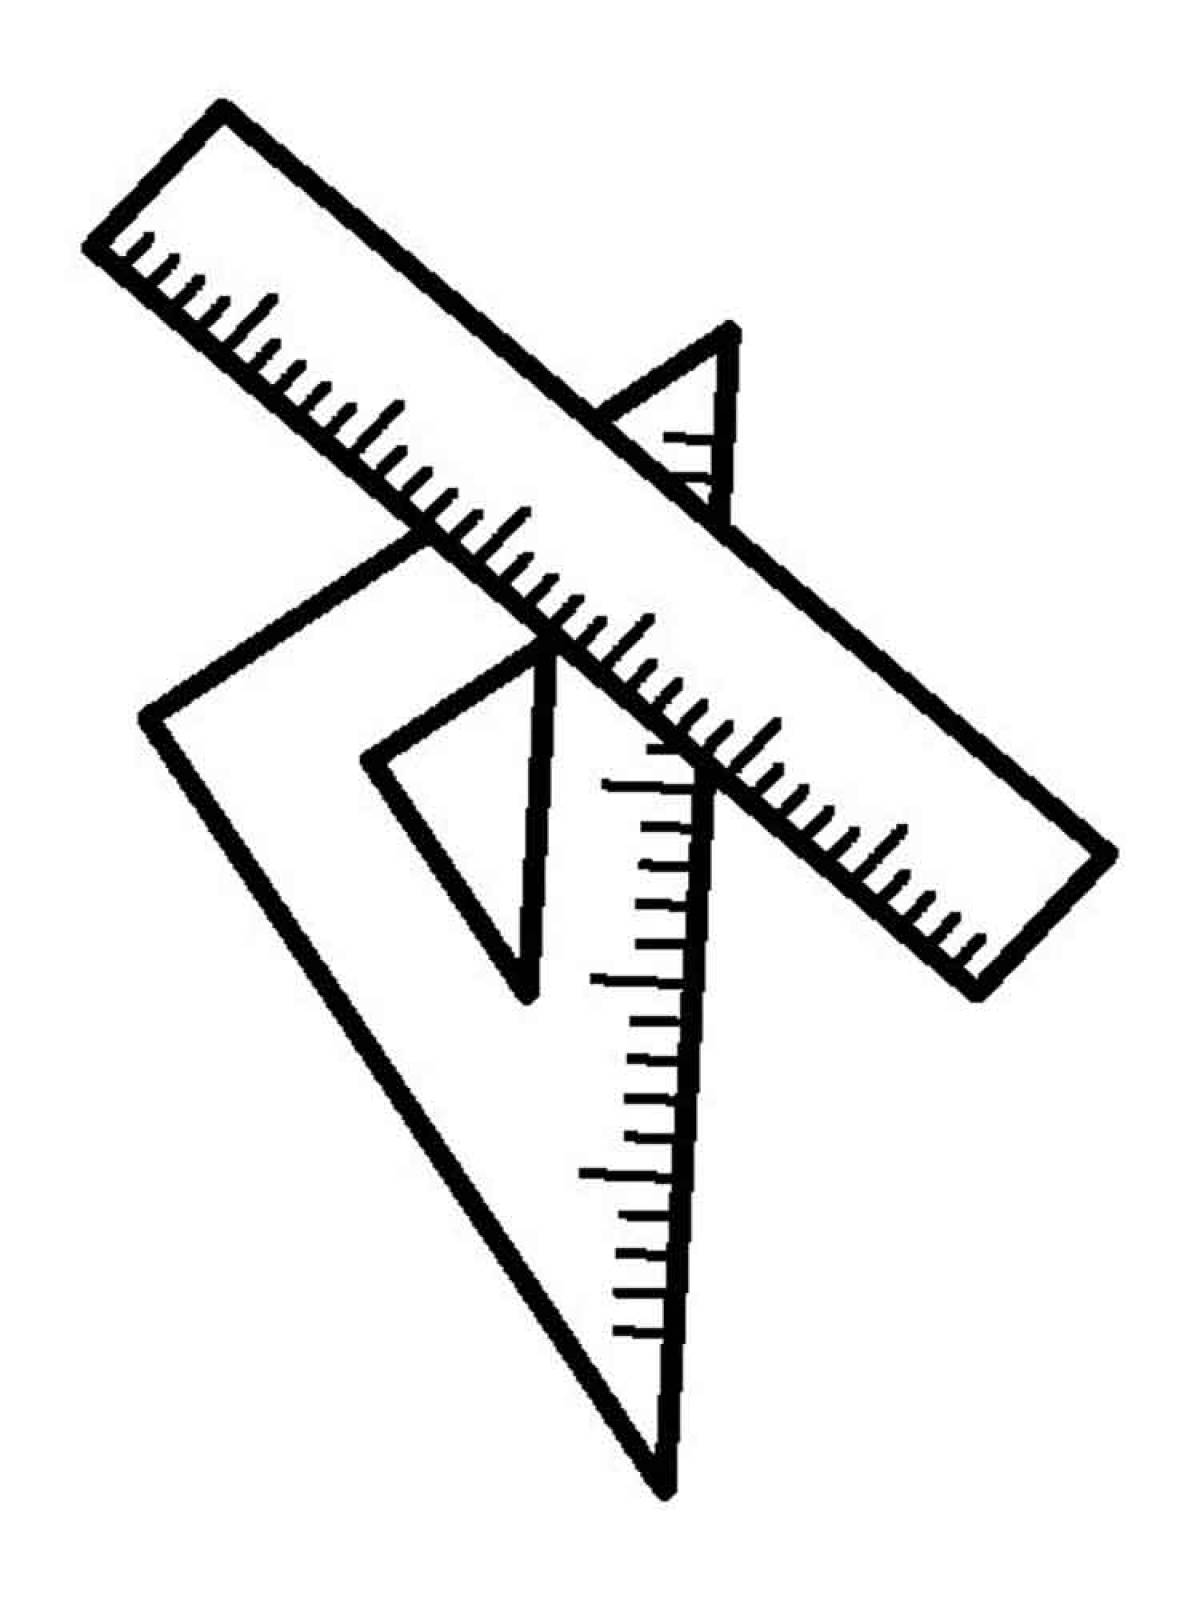 Ruler Coloring Page